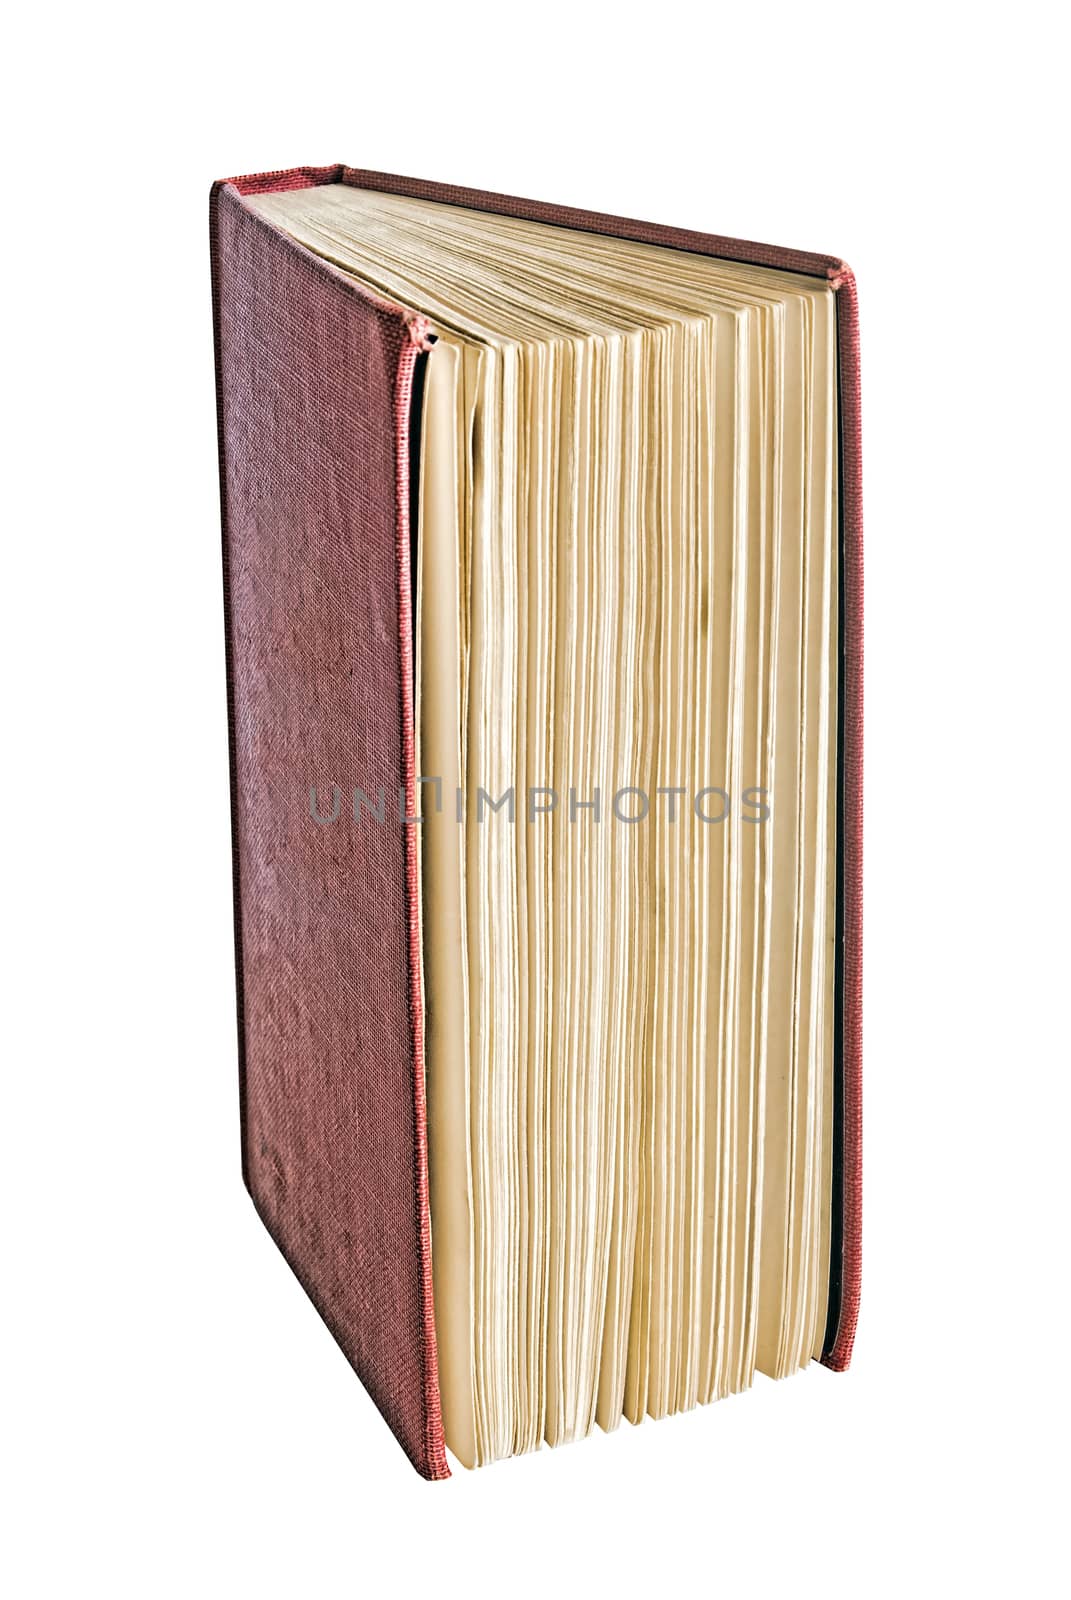 Old book with red cover ready to read. Isolated on a white background.